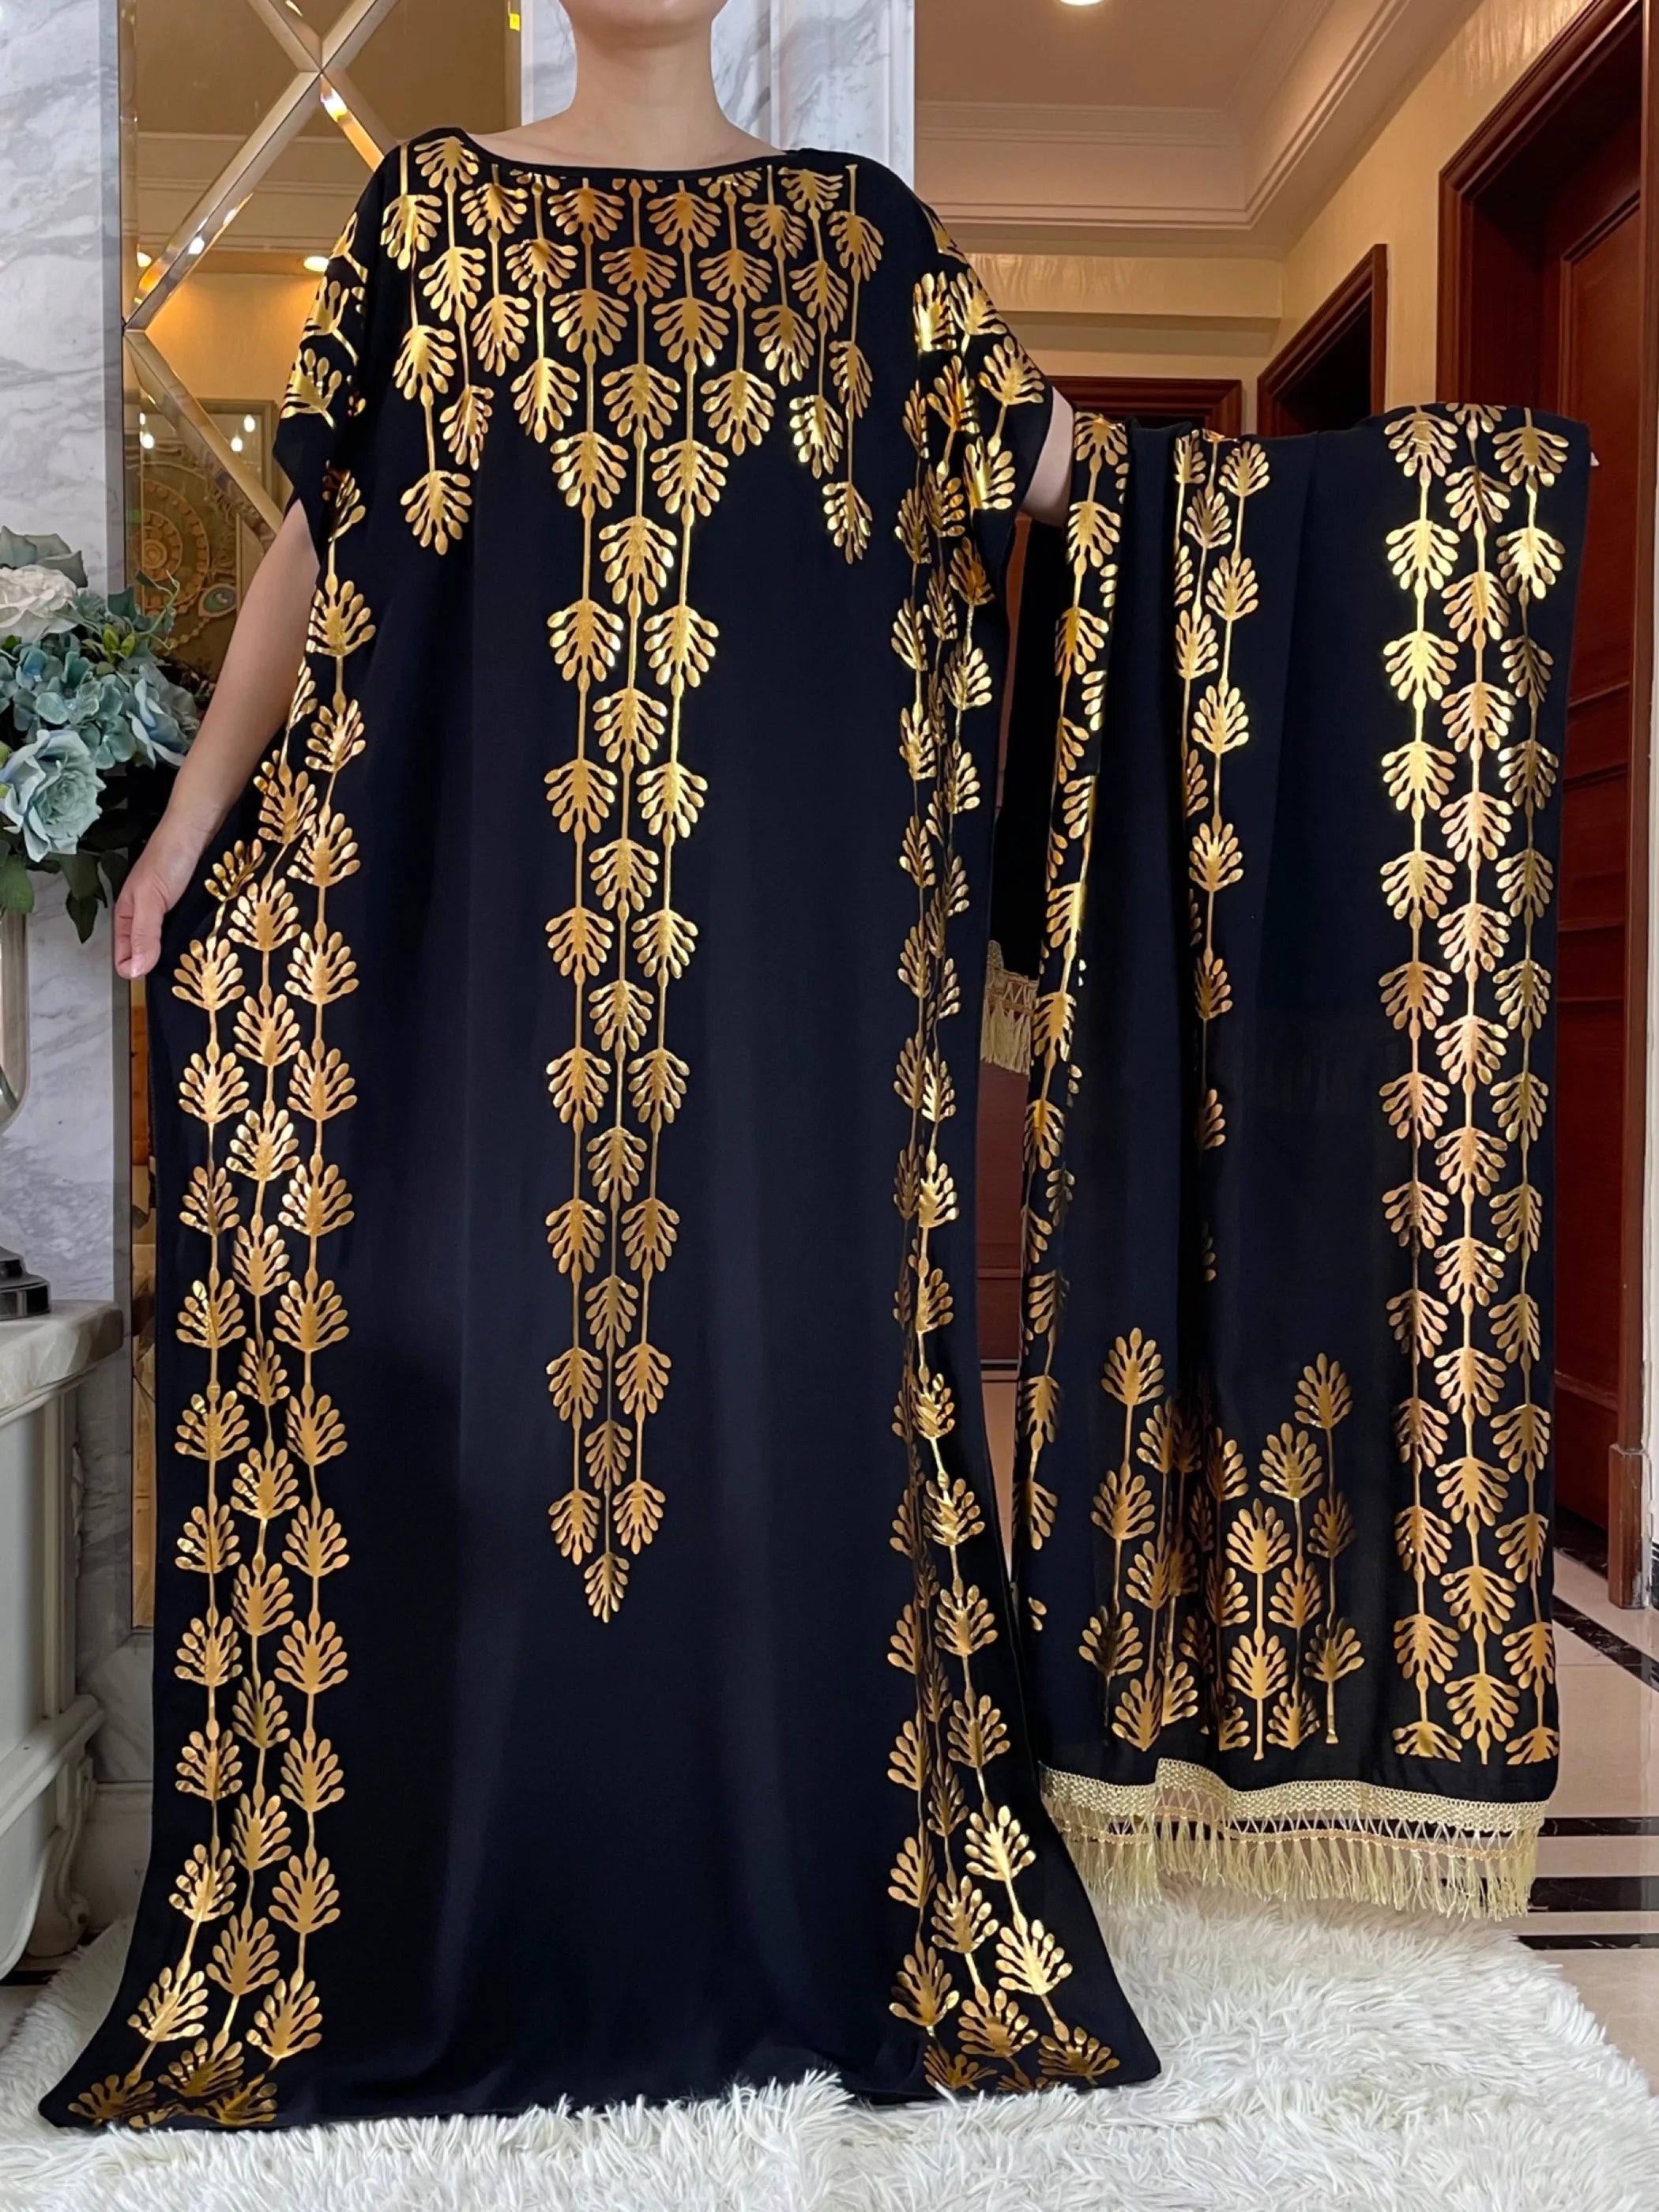 Summer Maxi Dress: Cotton with Gold Stamping, Short Sleeves, and Matching Big Scarf - Flexi Africa - Flexi Africa offers Free Delivery Worldwide - Vibrant African traditional clothing showcasing bold prints and intricate designs